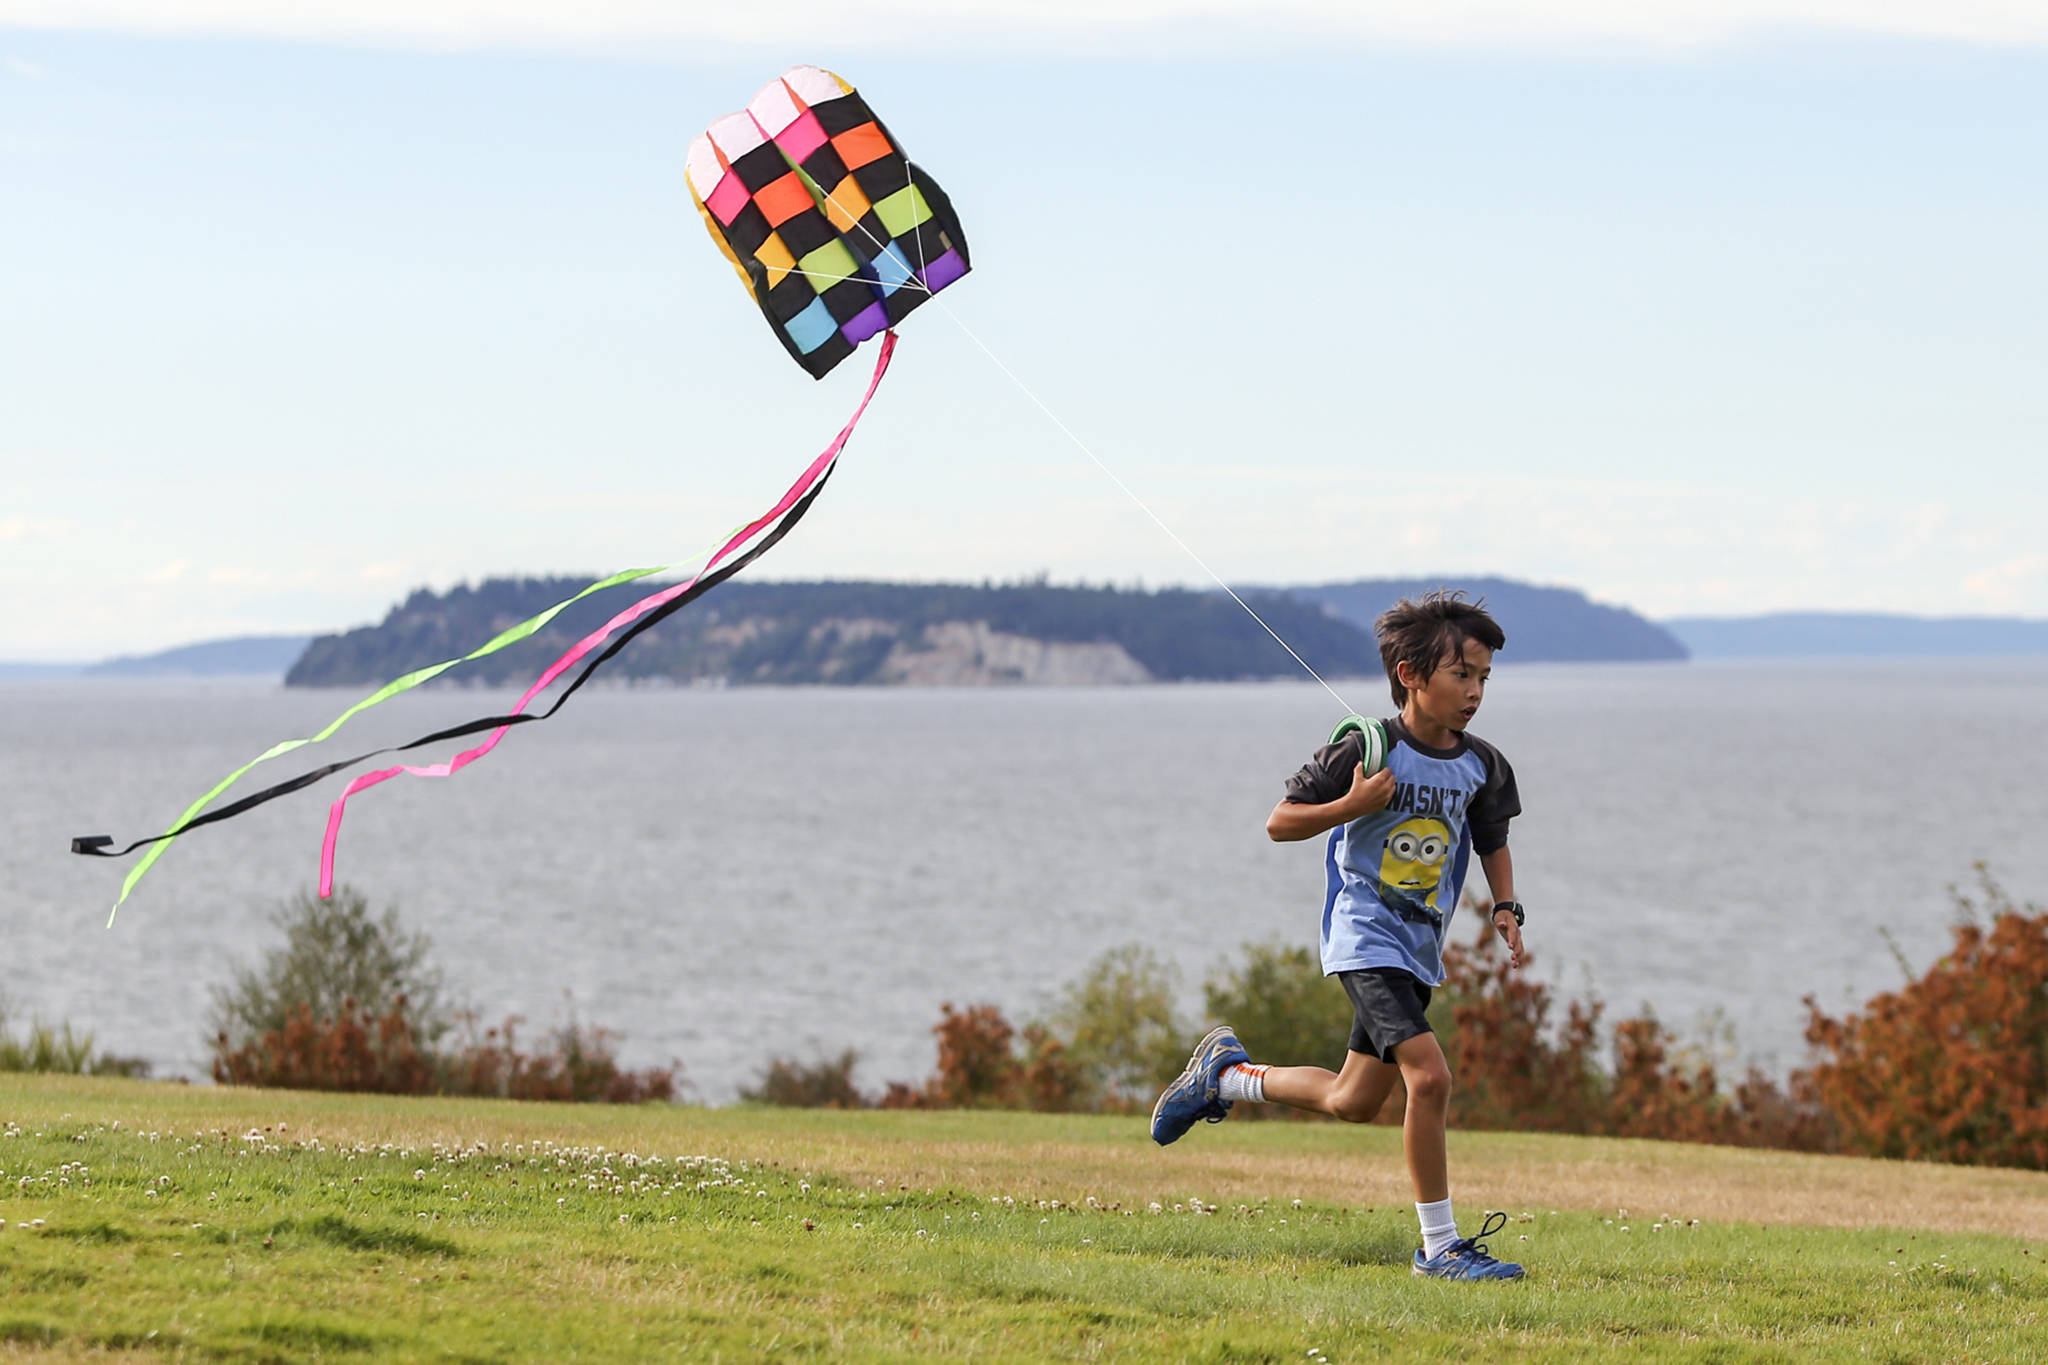 Francis Bomersheim, 9, flies a kite at Harborview Park in Everett on Aug. 23. (Kevin Clark / The Herald)